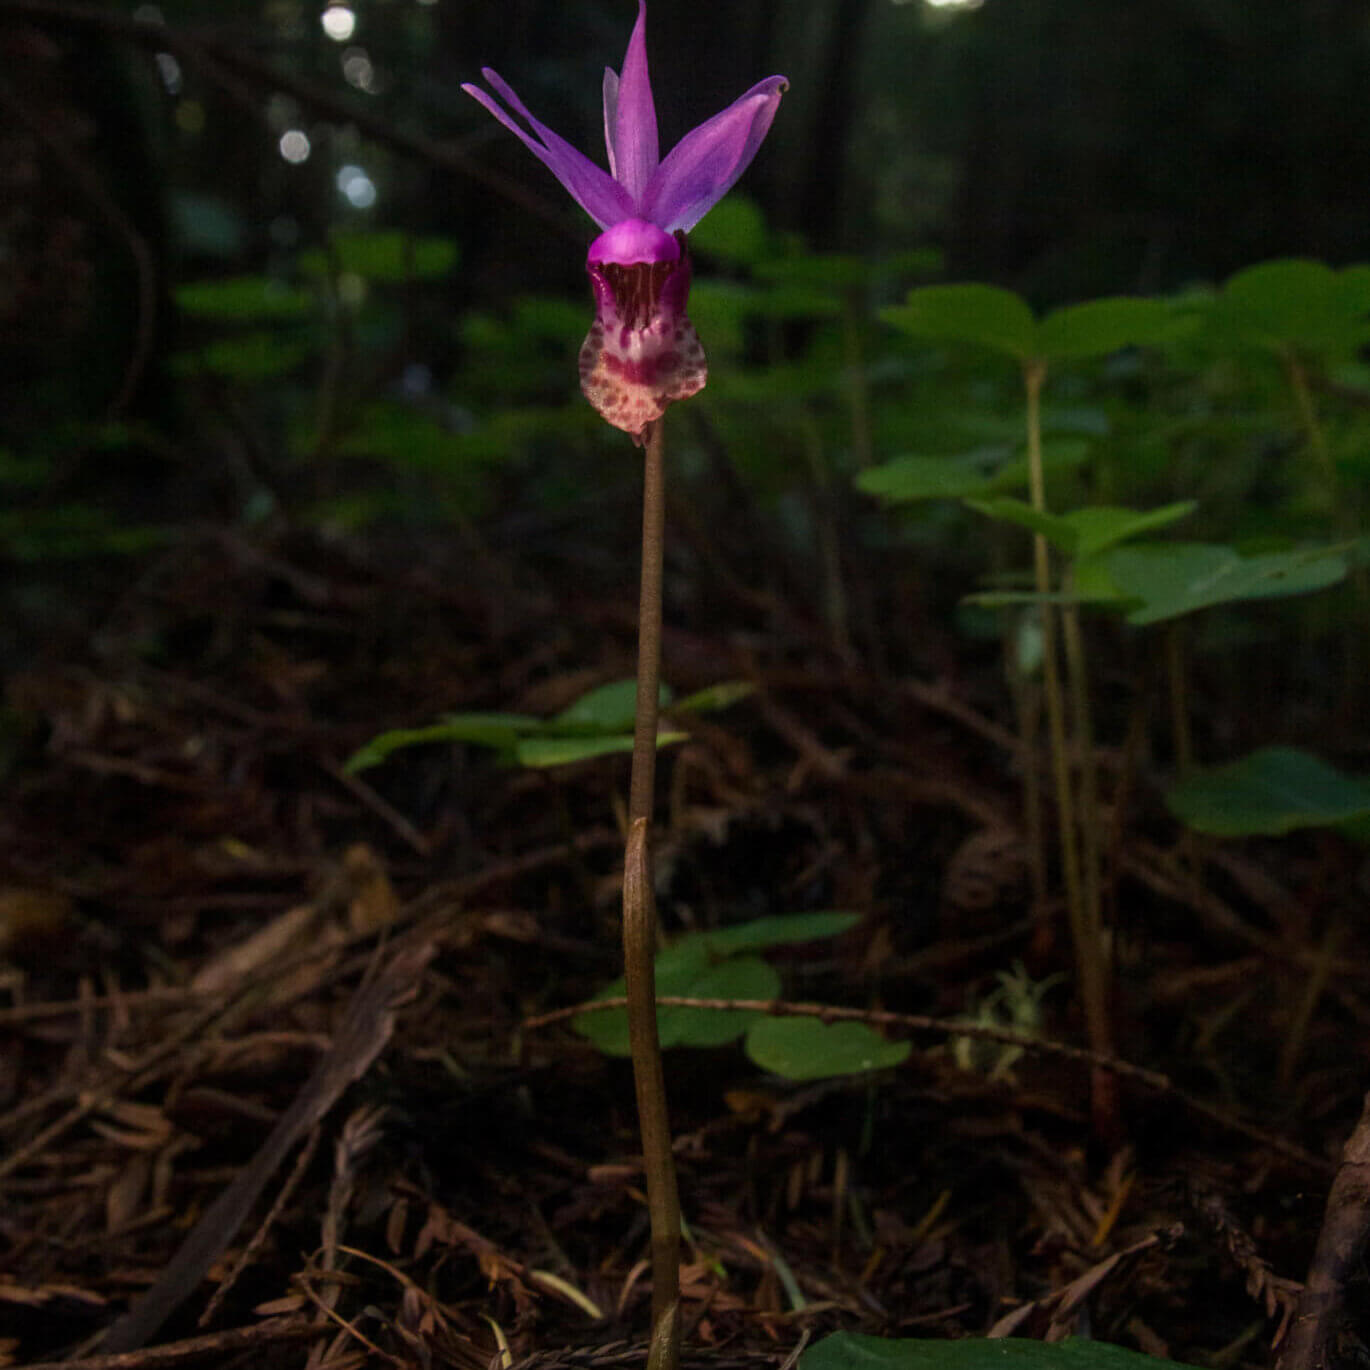 Fairy Slipper Orchid. Courtesy of CNPS